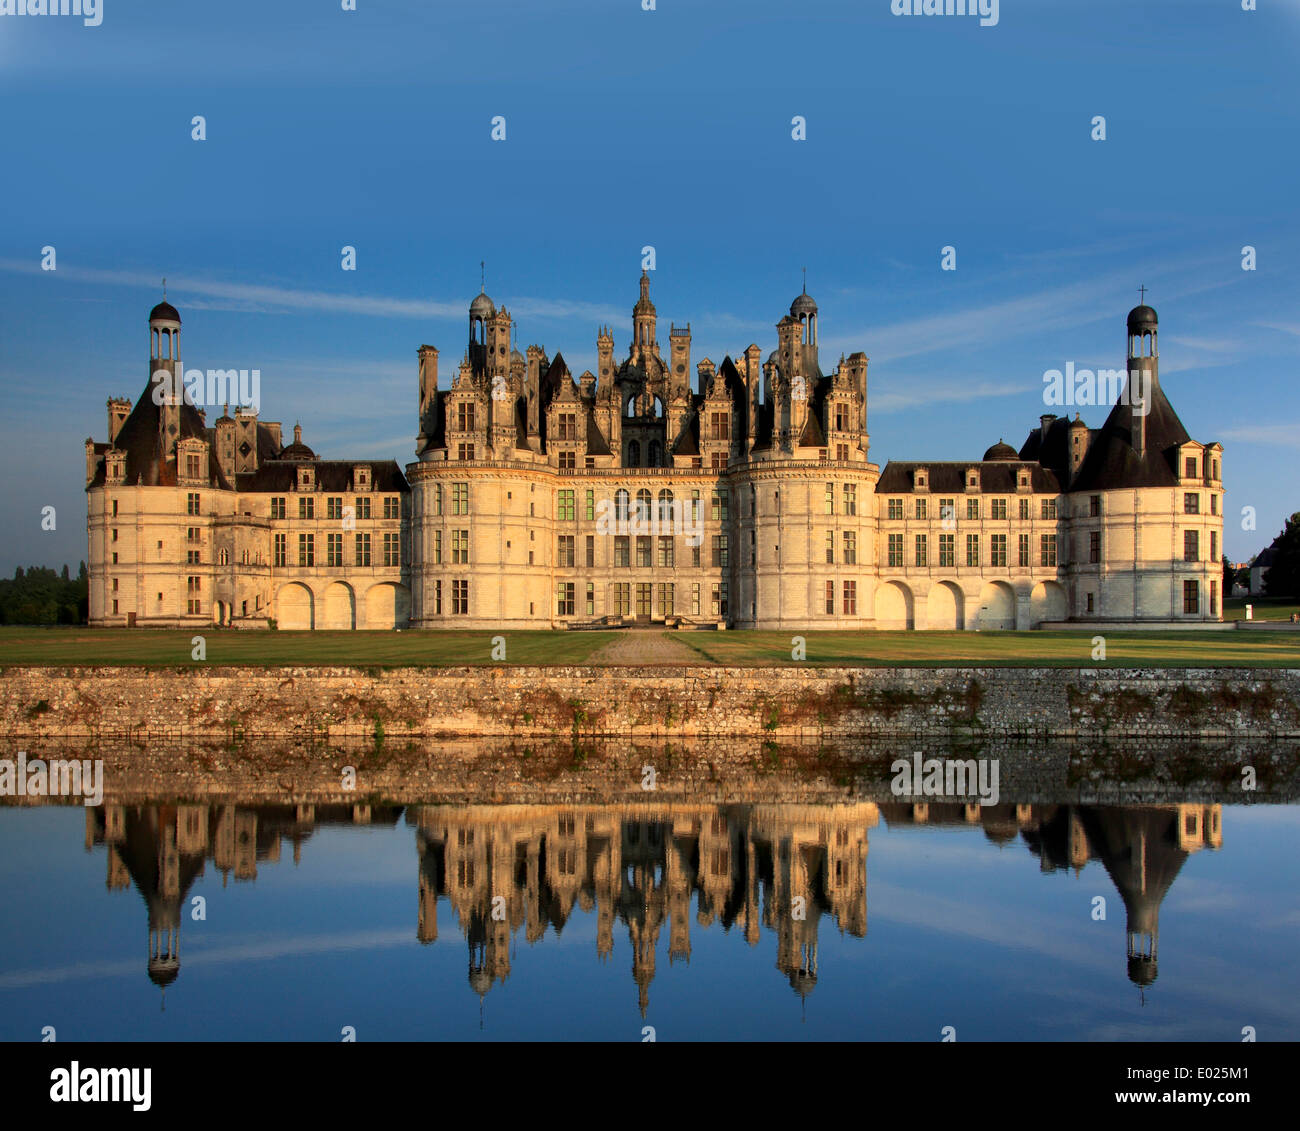 Photo of the north side of Chateau de Chambord, reflecting in evening and night lighting, Chambord, Loire Valley, France Stock Photo